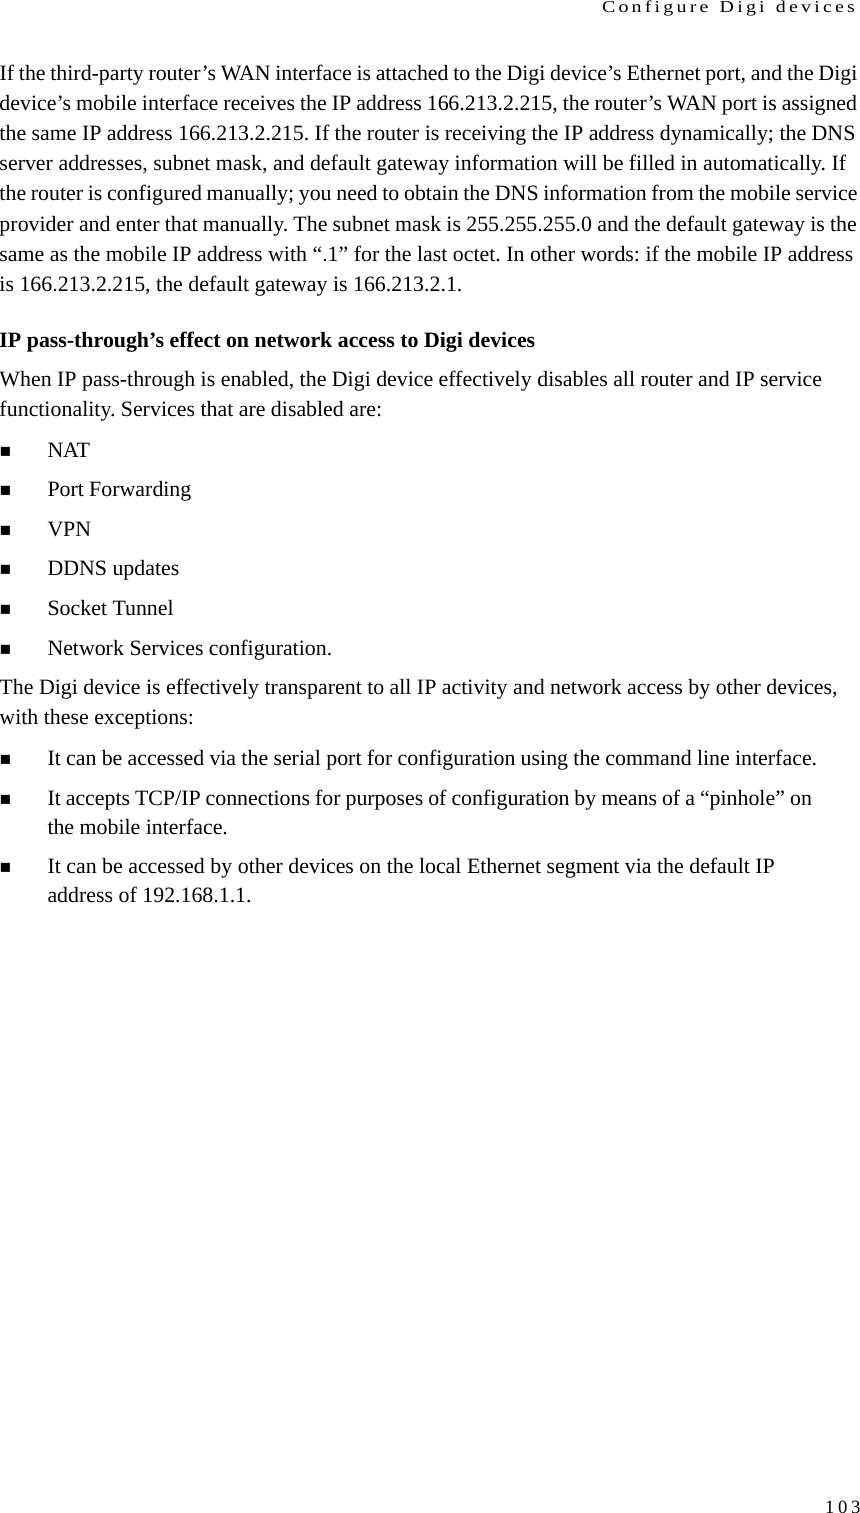 Configure Digi devices103If the third-party router’s WAN interface is attached to the Digi device’s Ethernet port, and the Digi device’s mobile interface receives the IP address 166.213.2.215, the router’s WAN port is assigned the same IP address 166.213.2.215. If the router is receiving the IP address dynamically; the DNS server addresses, subnet mask, and default gateway information will be filled in automatically. If the router is configured manually; you need to obtain the DNS information from the mobile service provider and enter that manually. The subnet mask is 255.255.255.0 and the default gateway is the same as the mobile IP address with “.1” for the last octet. In other words: if the mobile IP address is 166.213.2.215, the default gateway is 166.213.2.1.IP pass-through’s effect on network access to Digi devicesWhen IP pass-through is enabled, the Digi device effectively disables all router and IP service functionality. Services that are disabled are: NATPort ForwardingVPNDDNS updatesSocket Tunnel Network Services configuration.The Digi device is effectively transparent to all IP activity and network access by other devices, with these exceptions:It can be accessed via the serial port for configuration using the command line interface.It accepts TCP/IP connections for purposes of configuration by means of a “pinhole” on the mobile interface. It can be accessed by other devices on the local Ethernet segment via the default IP address of 192.168.1.1. 